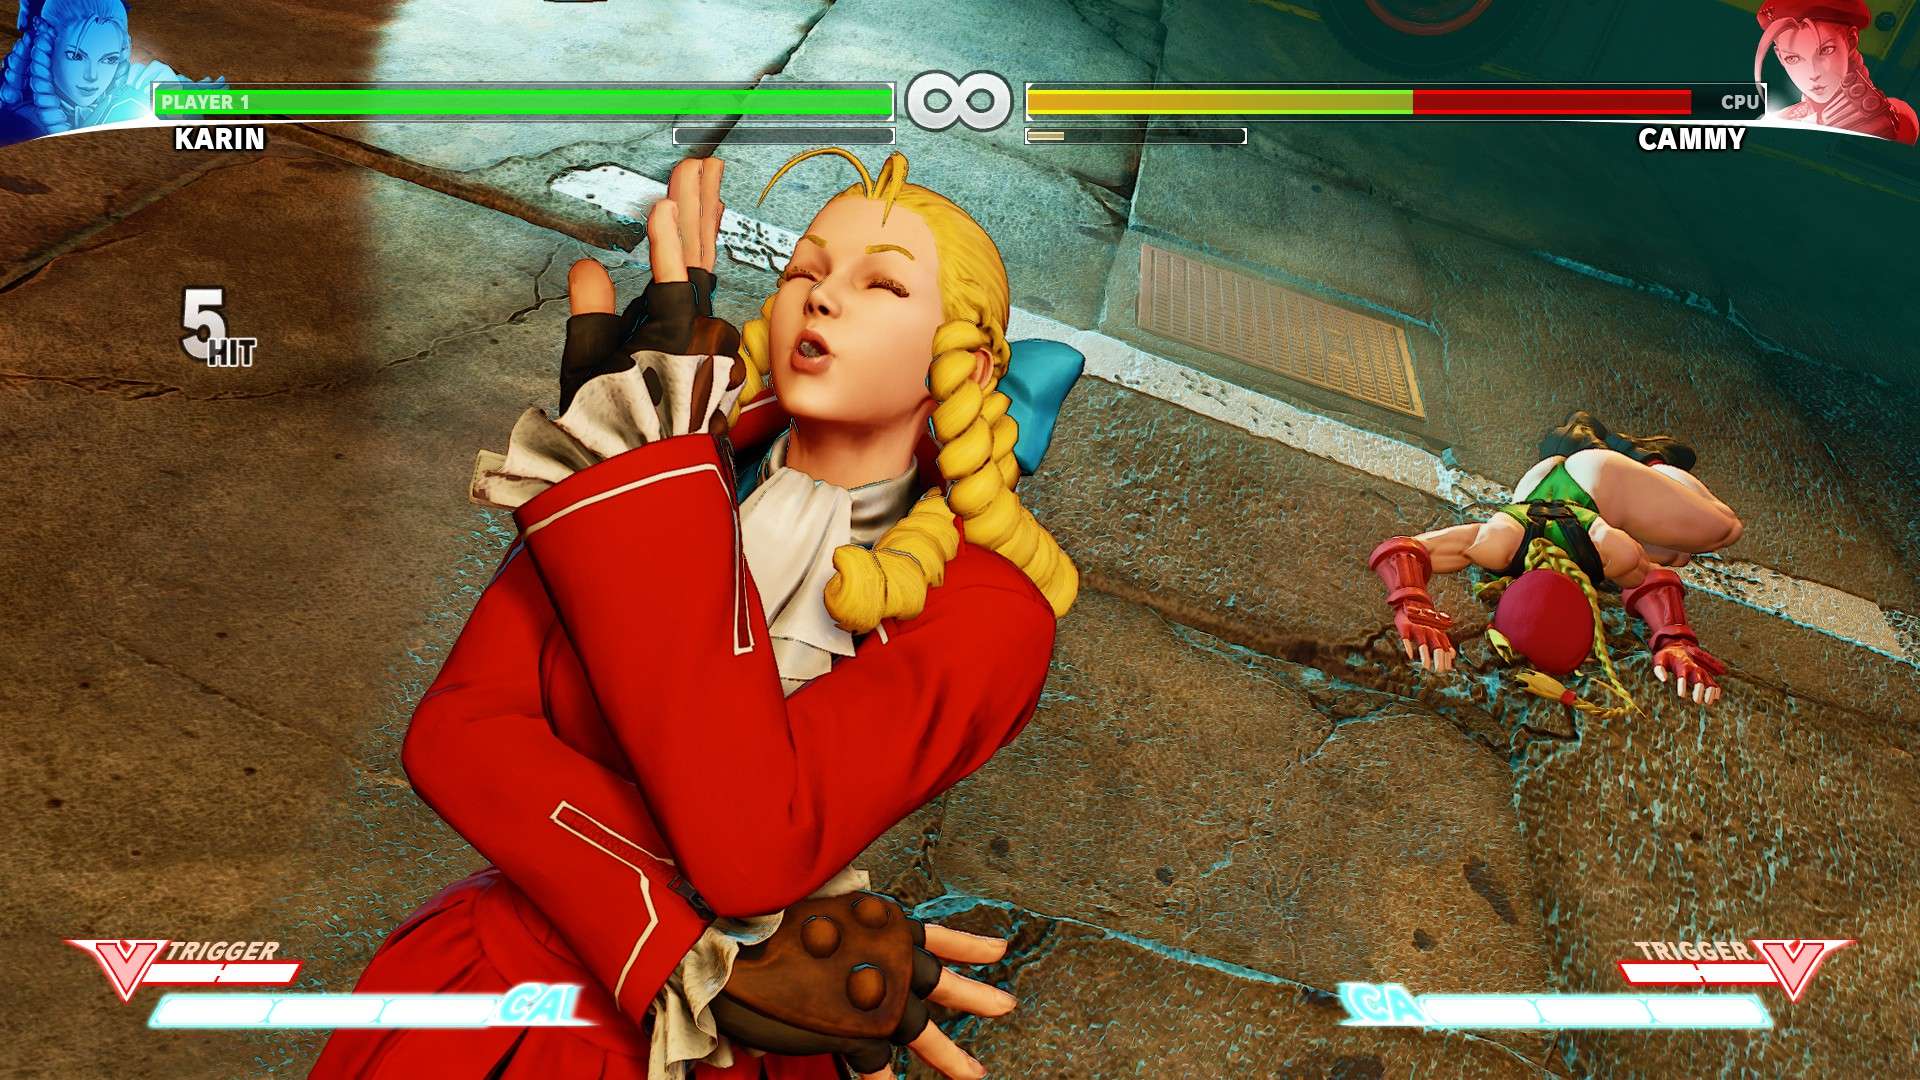 Cammy from Street Fighter becomes real thanks to an AI